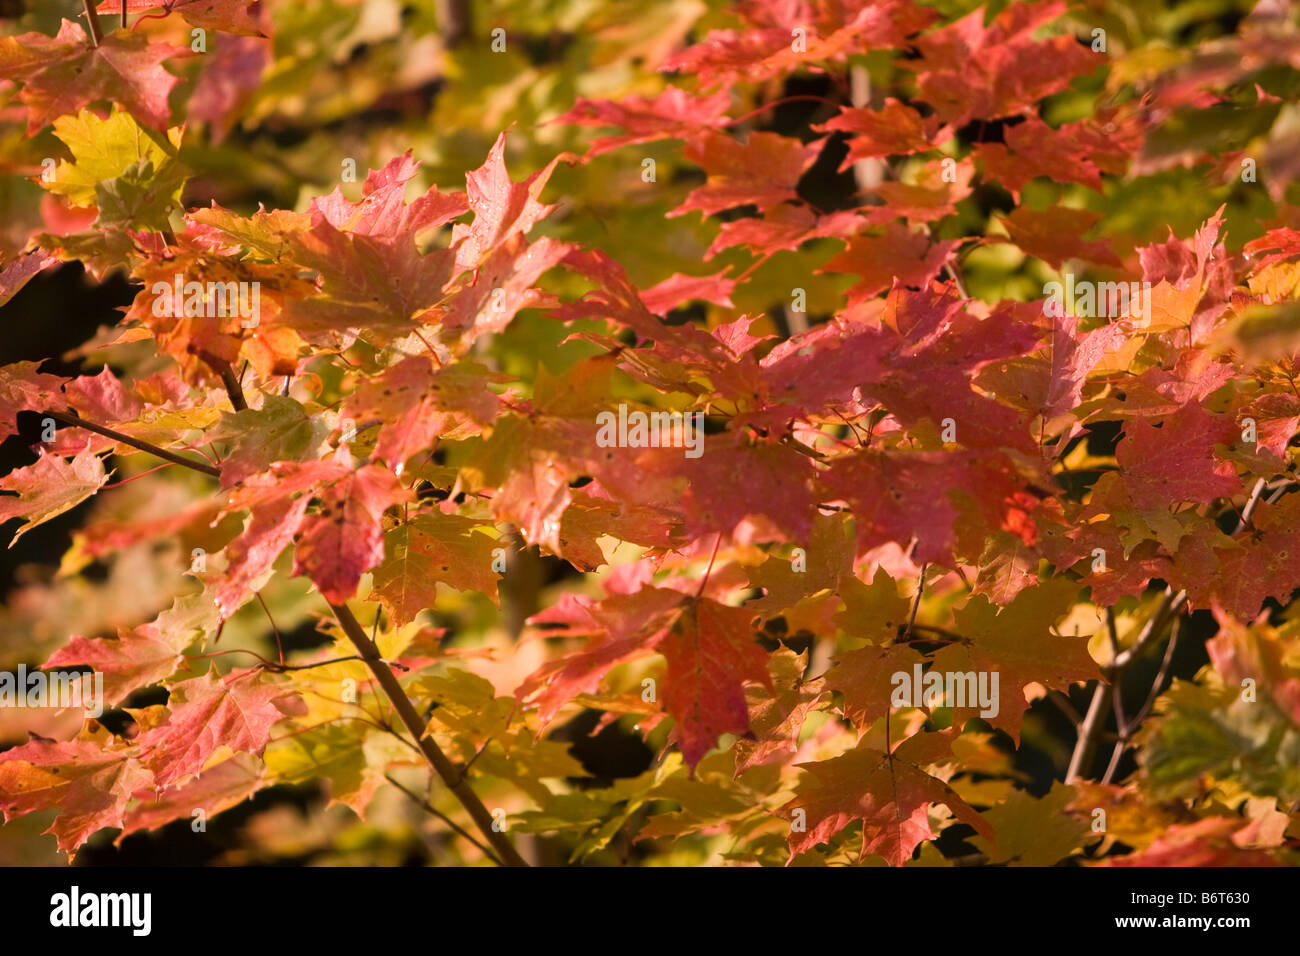 Maple eaves change color during fall in Vemont October 6 2008 Stock Photo